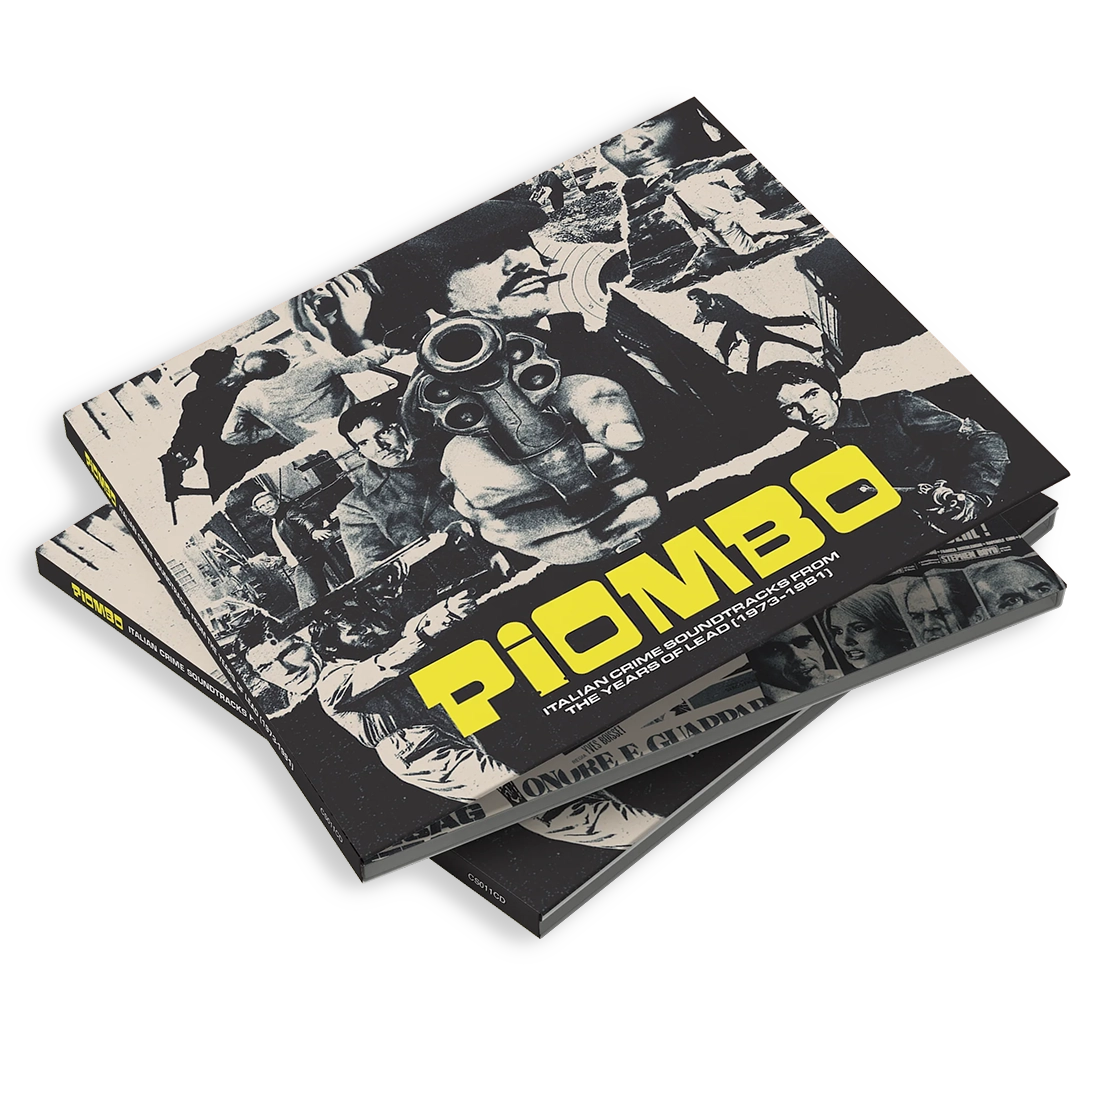 Various Artists - PIOMBO - Italian Crime Soundtracks From The Years Of Lead (1973-1981): CD